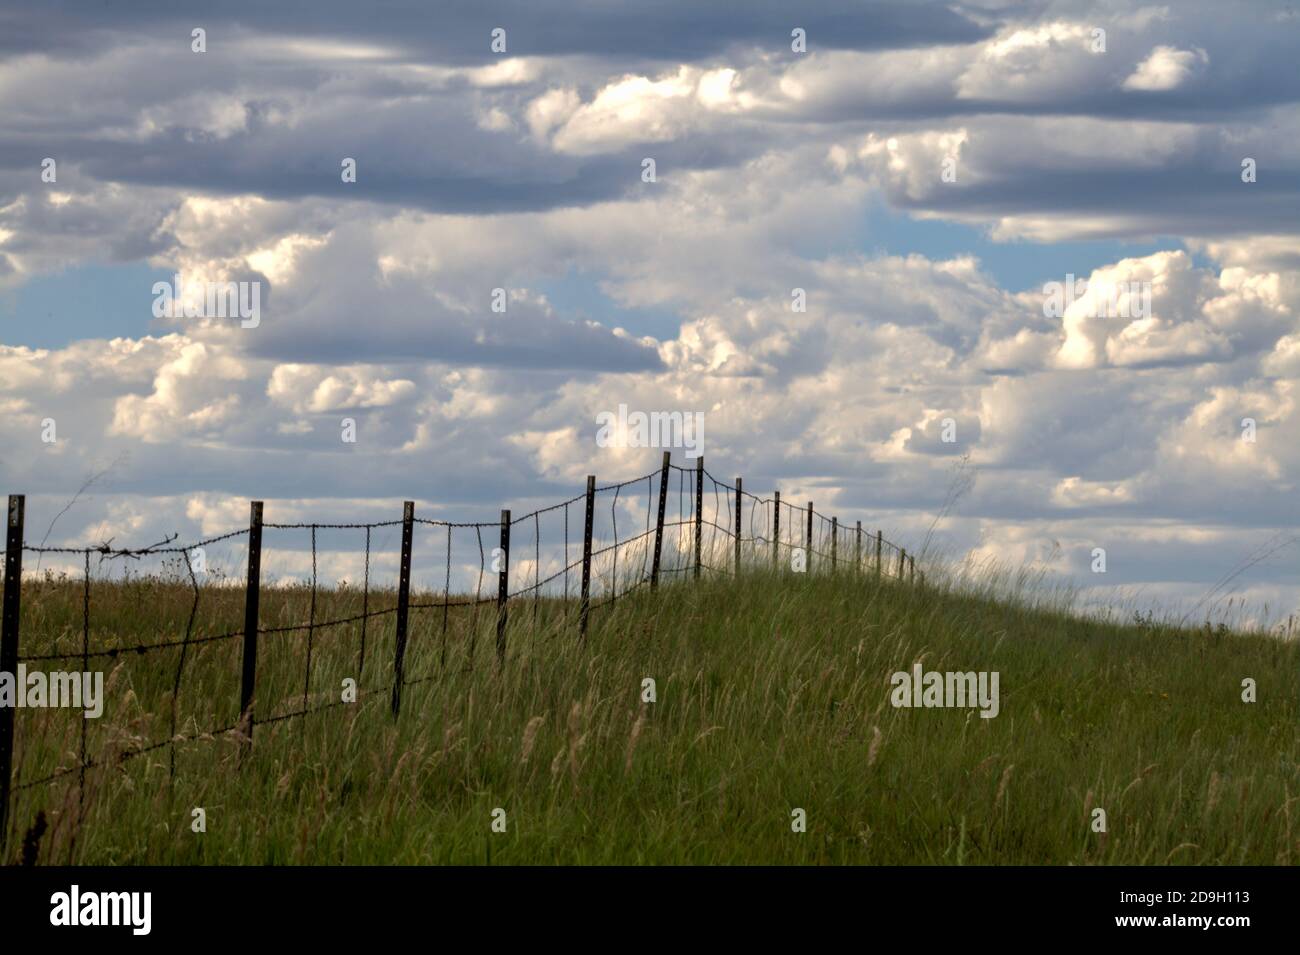 On a summer day brightly lit puffy, cumulus clouds hover over a grassy field divided by a three stranded barbed wire fence. Stock Photo